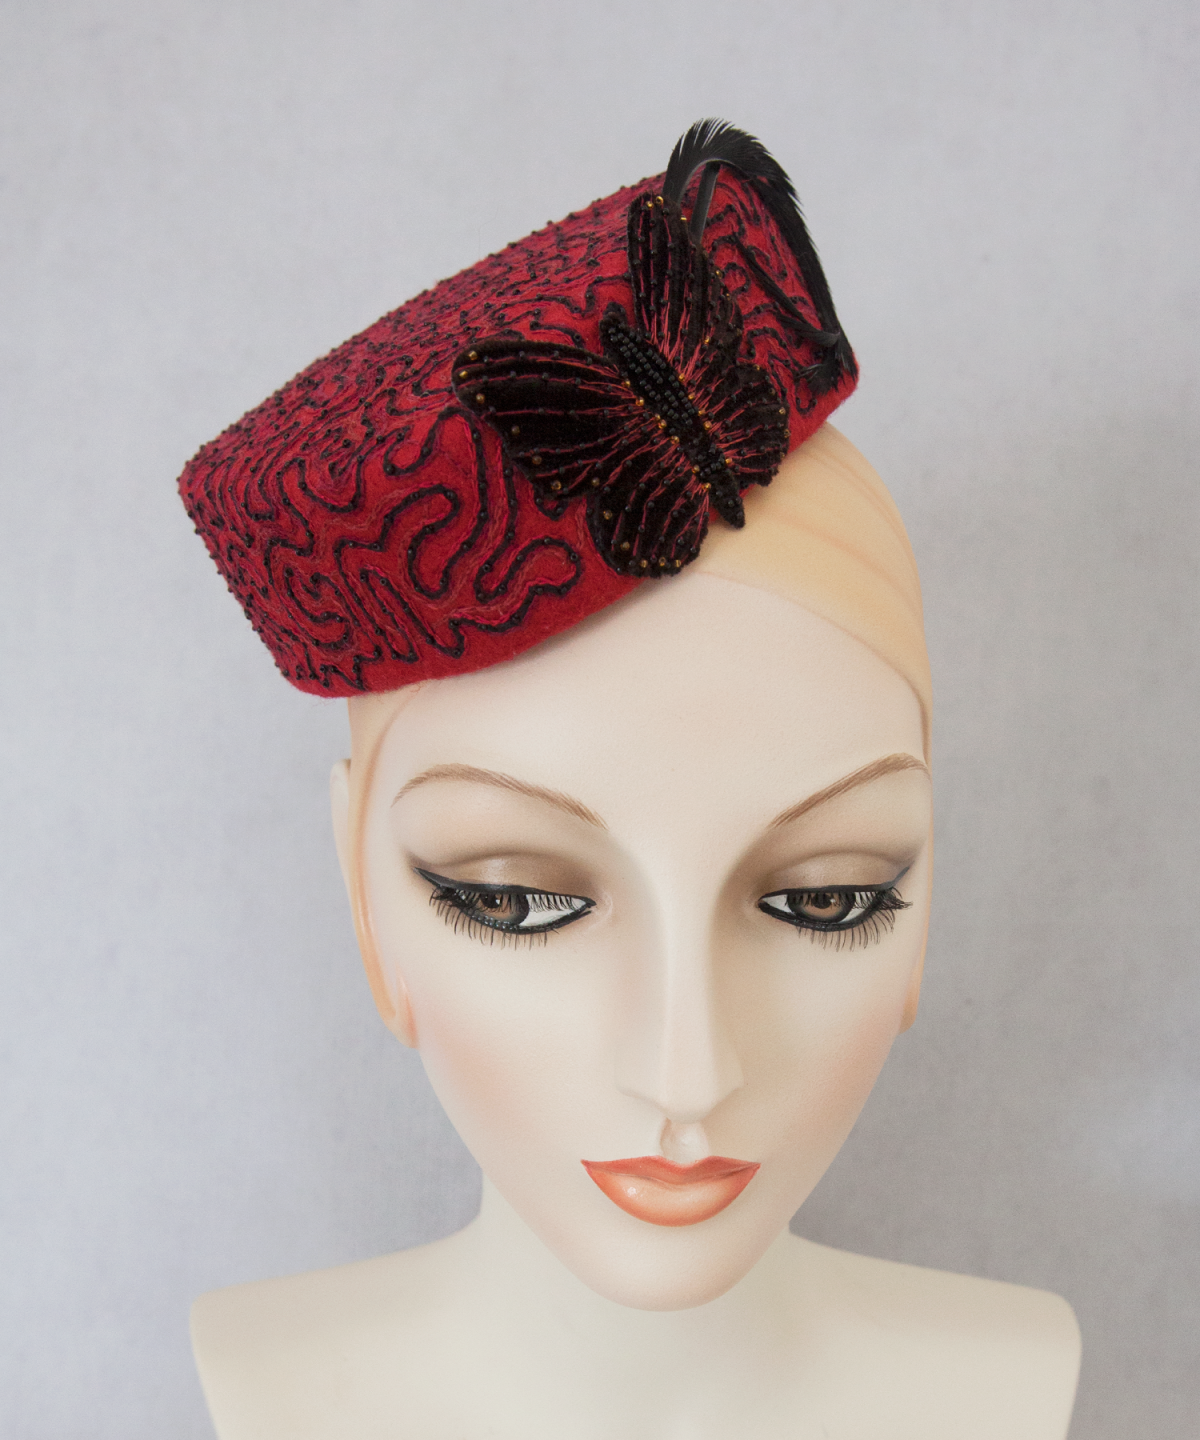 Signature Millinery Styles and Favorite “Millinery Operations” Topics?